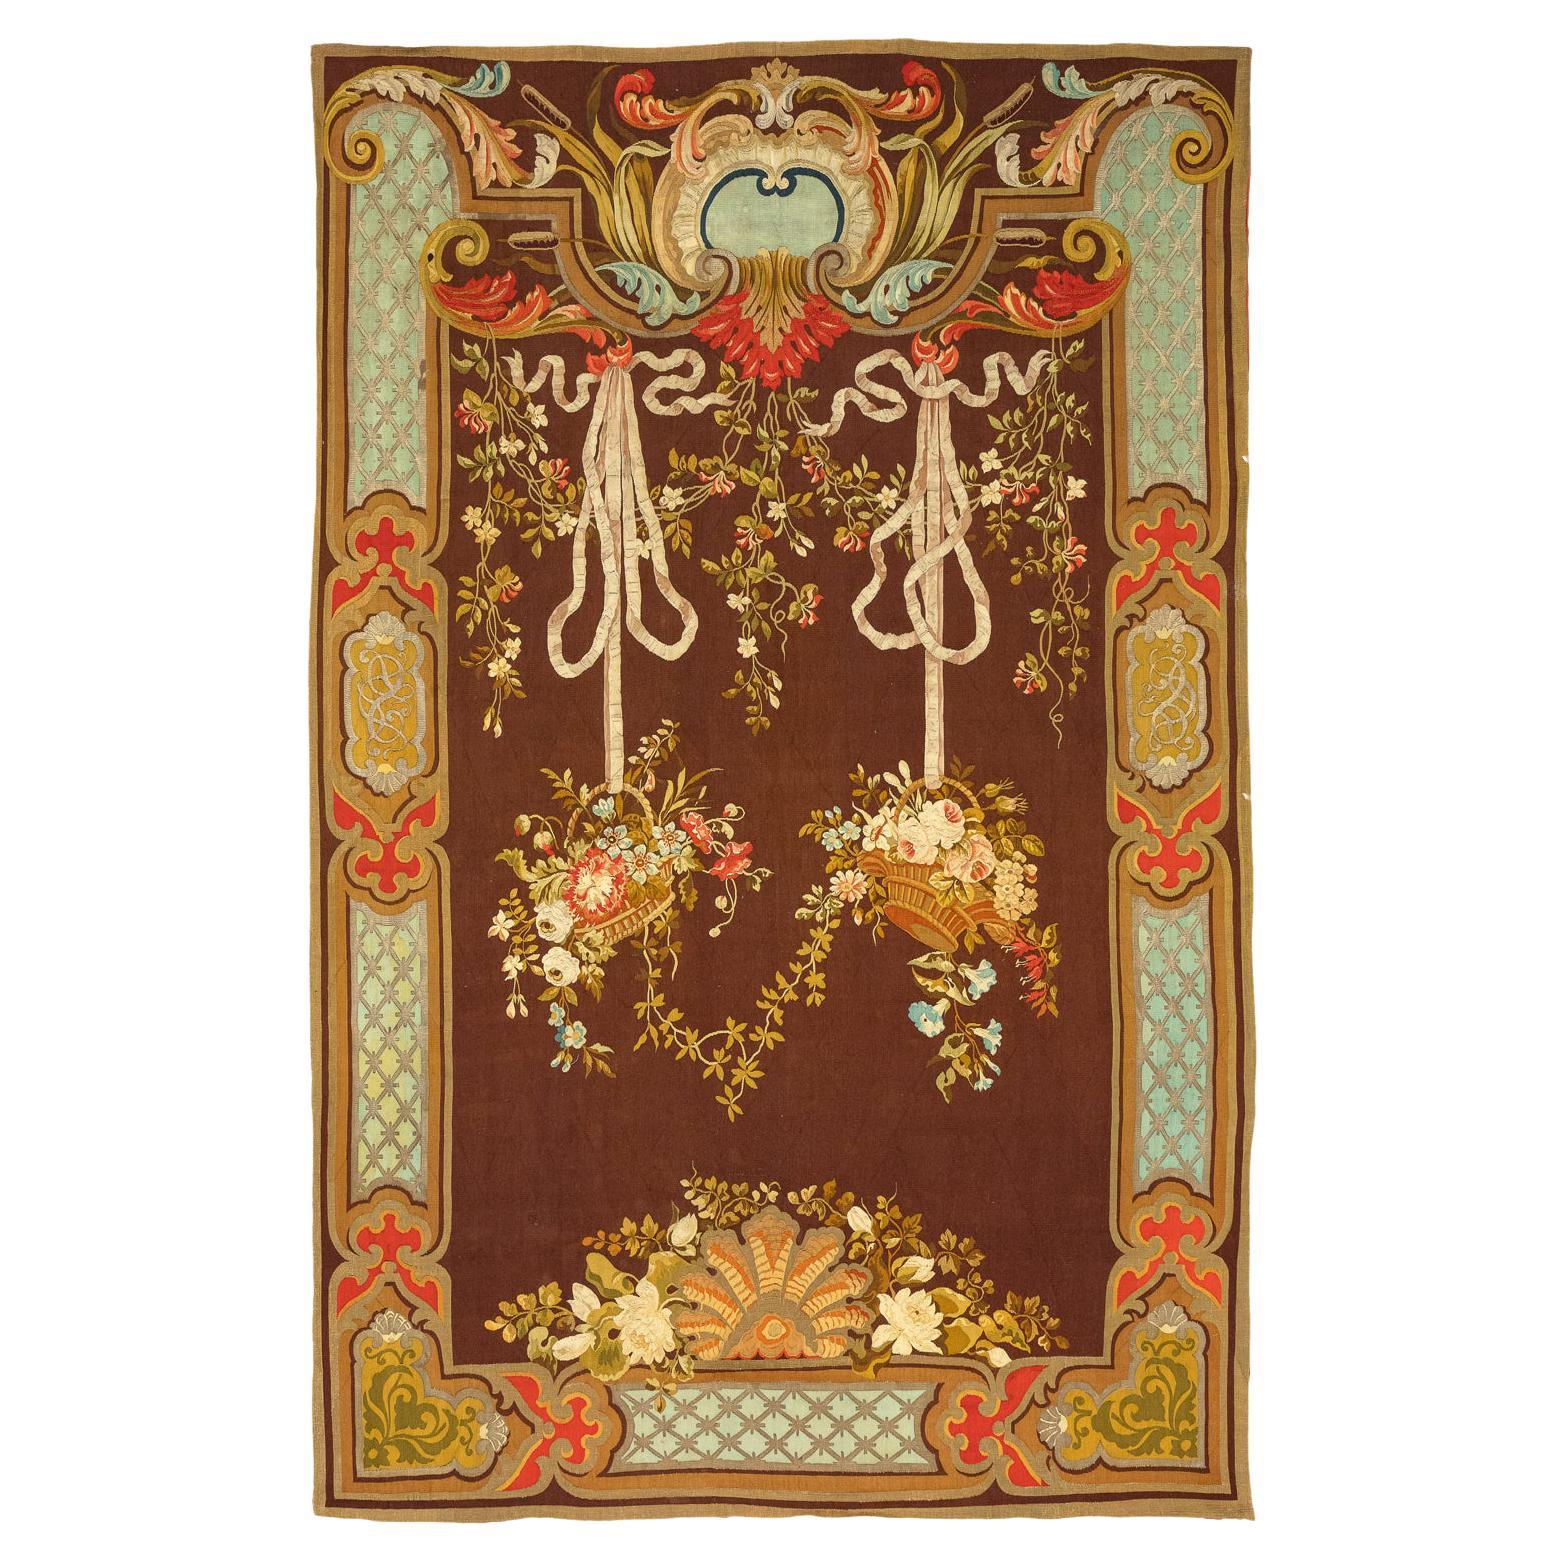 Antique Aubusson Style Silk&Metal Tapestry, Late 19th Century